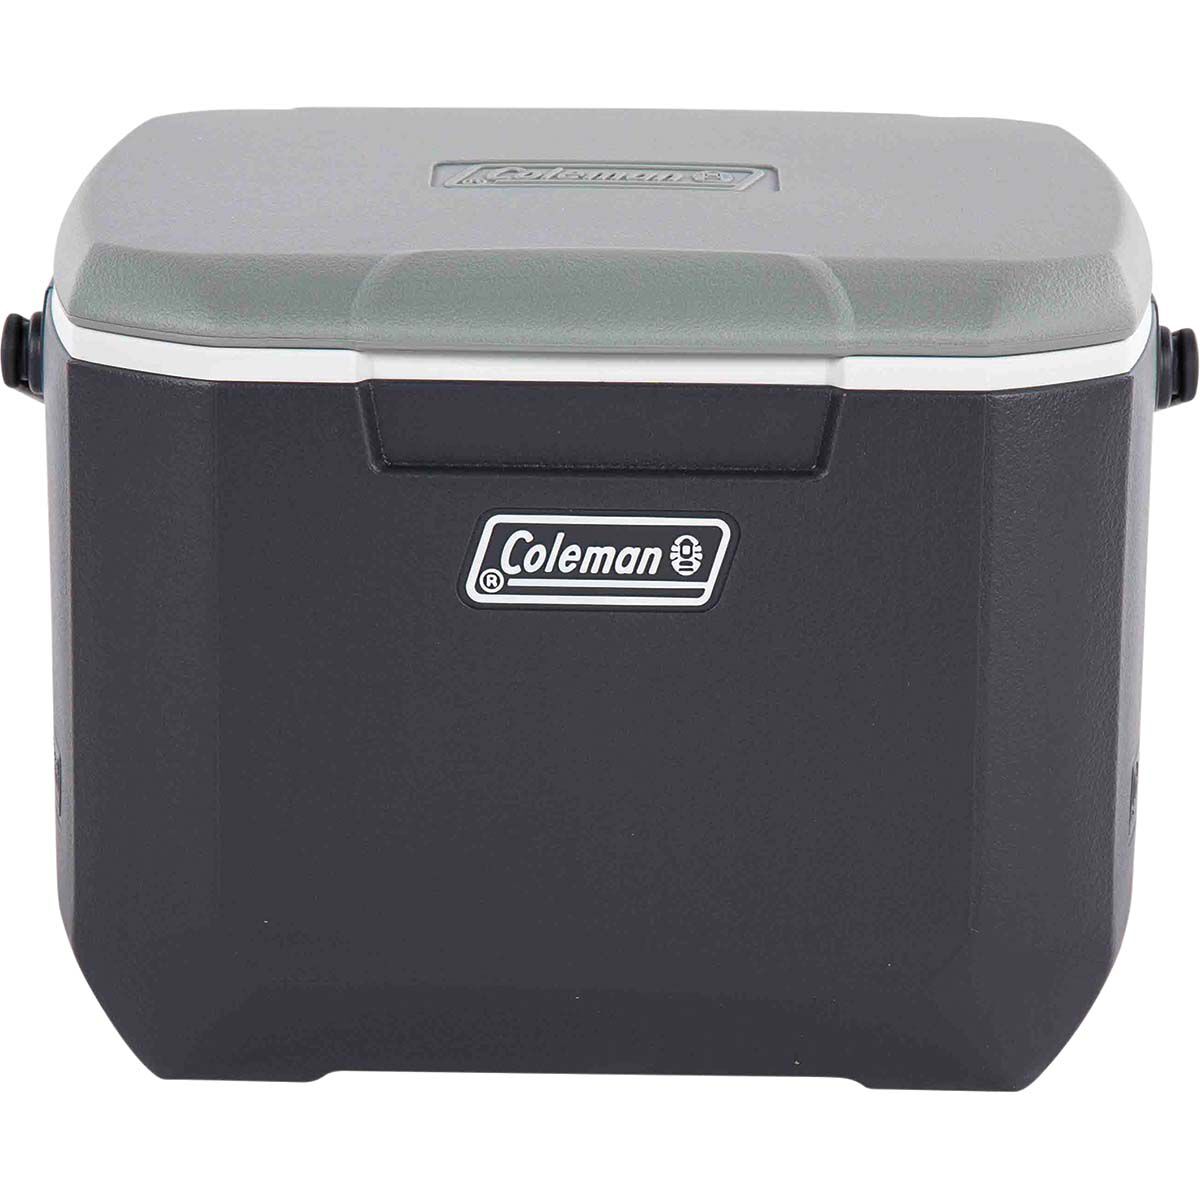 Coleman 316 Series 60QT Hard Chest Wheeled Cooler, Lakeside Blue 